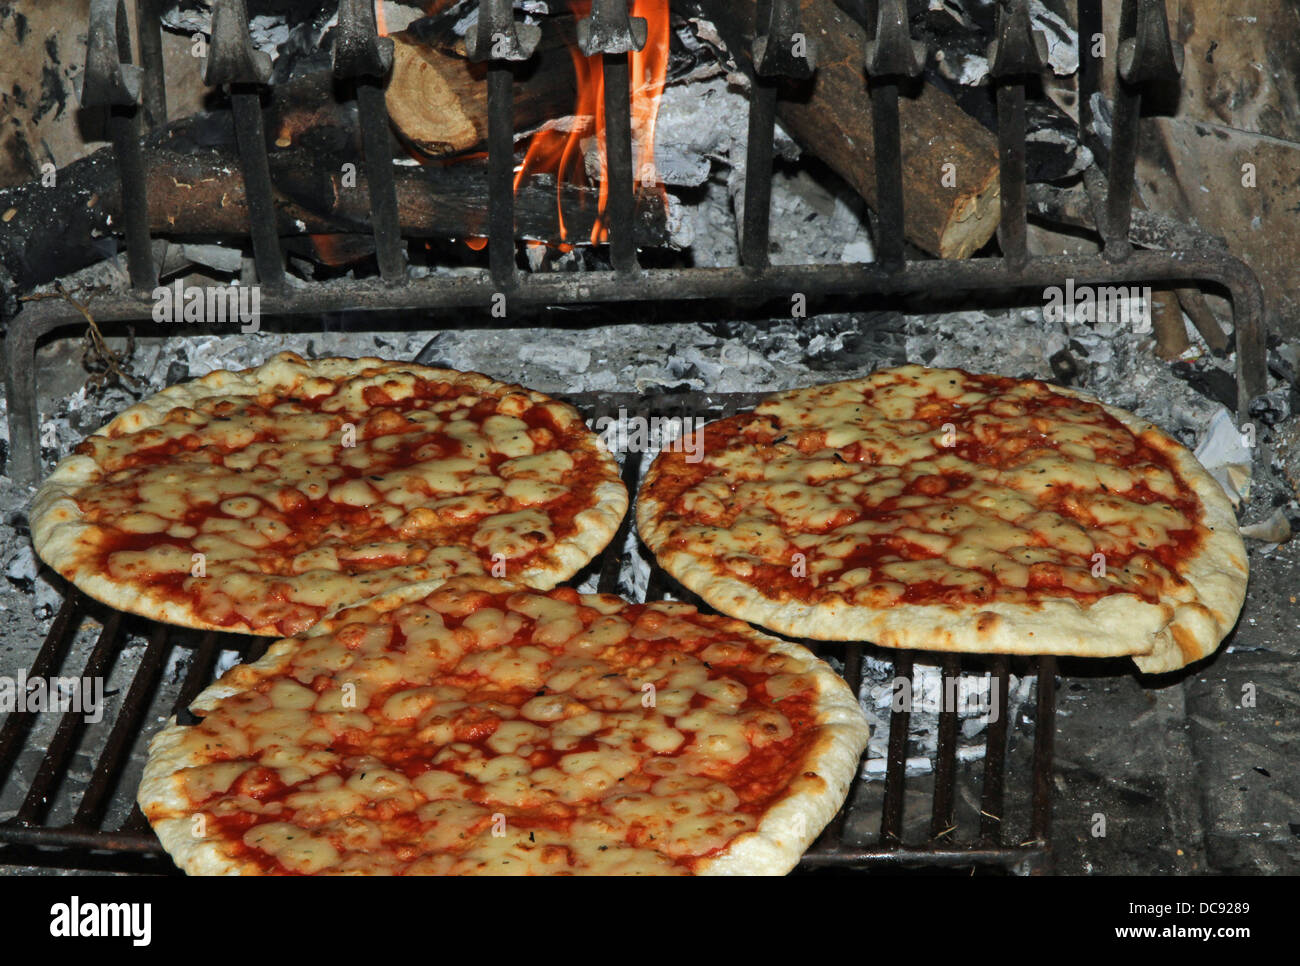 excellent fragrant pizza baked in a wood fireplace with a wood-burning oven pizzeria 5 Stock Photo